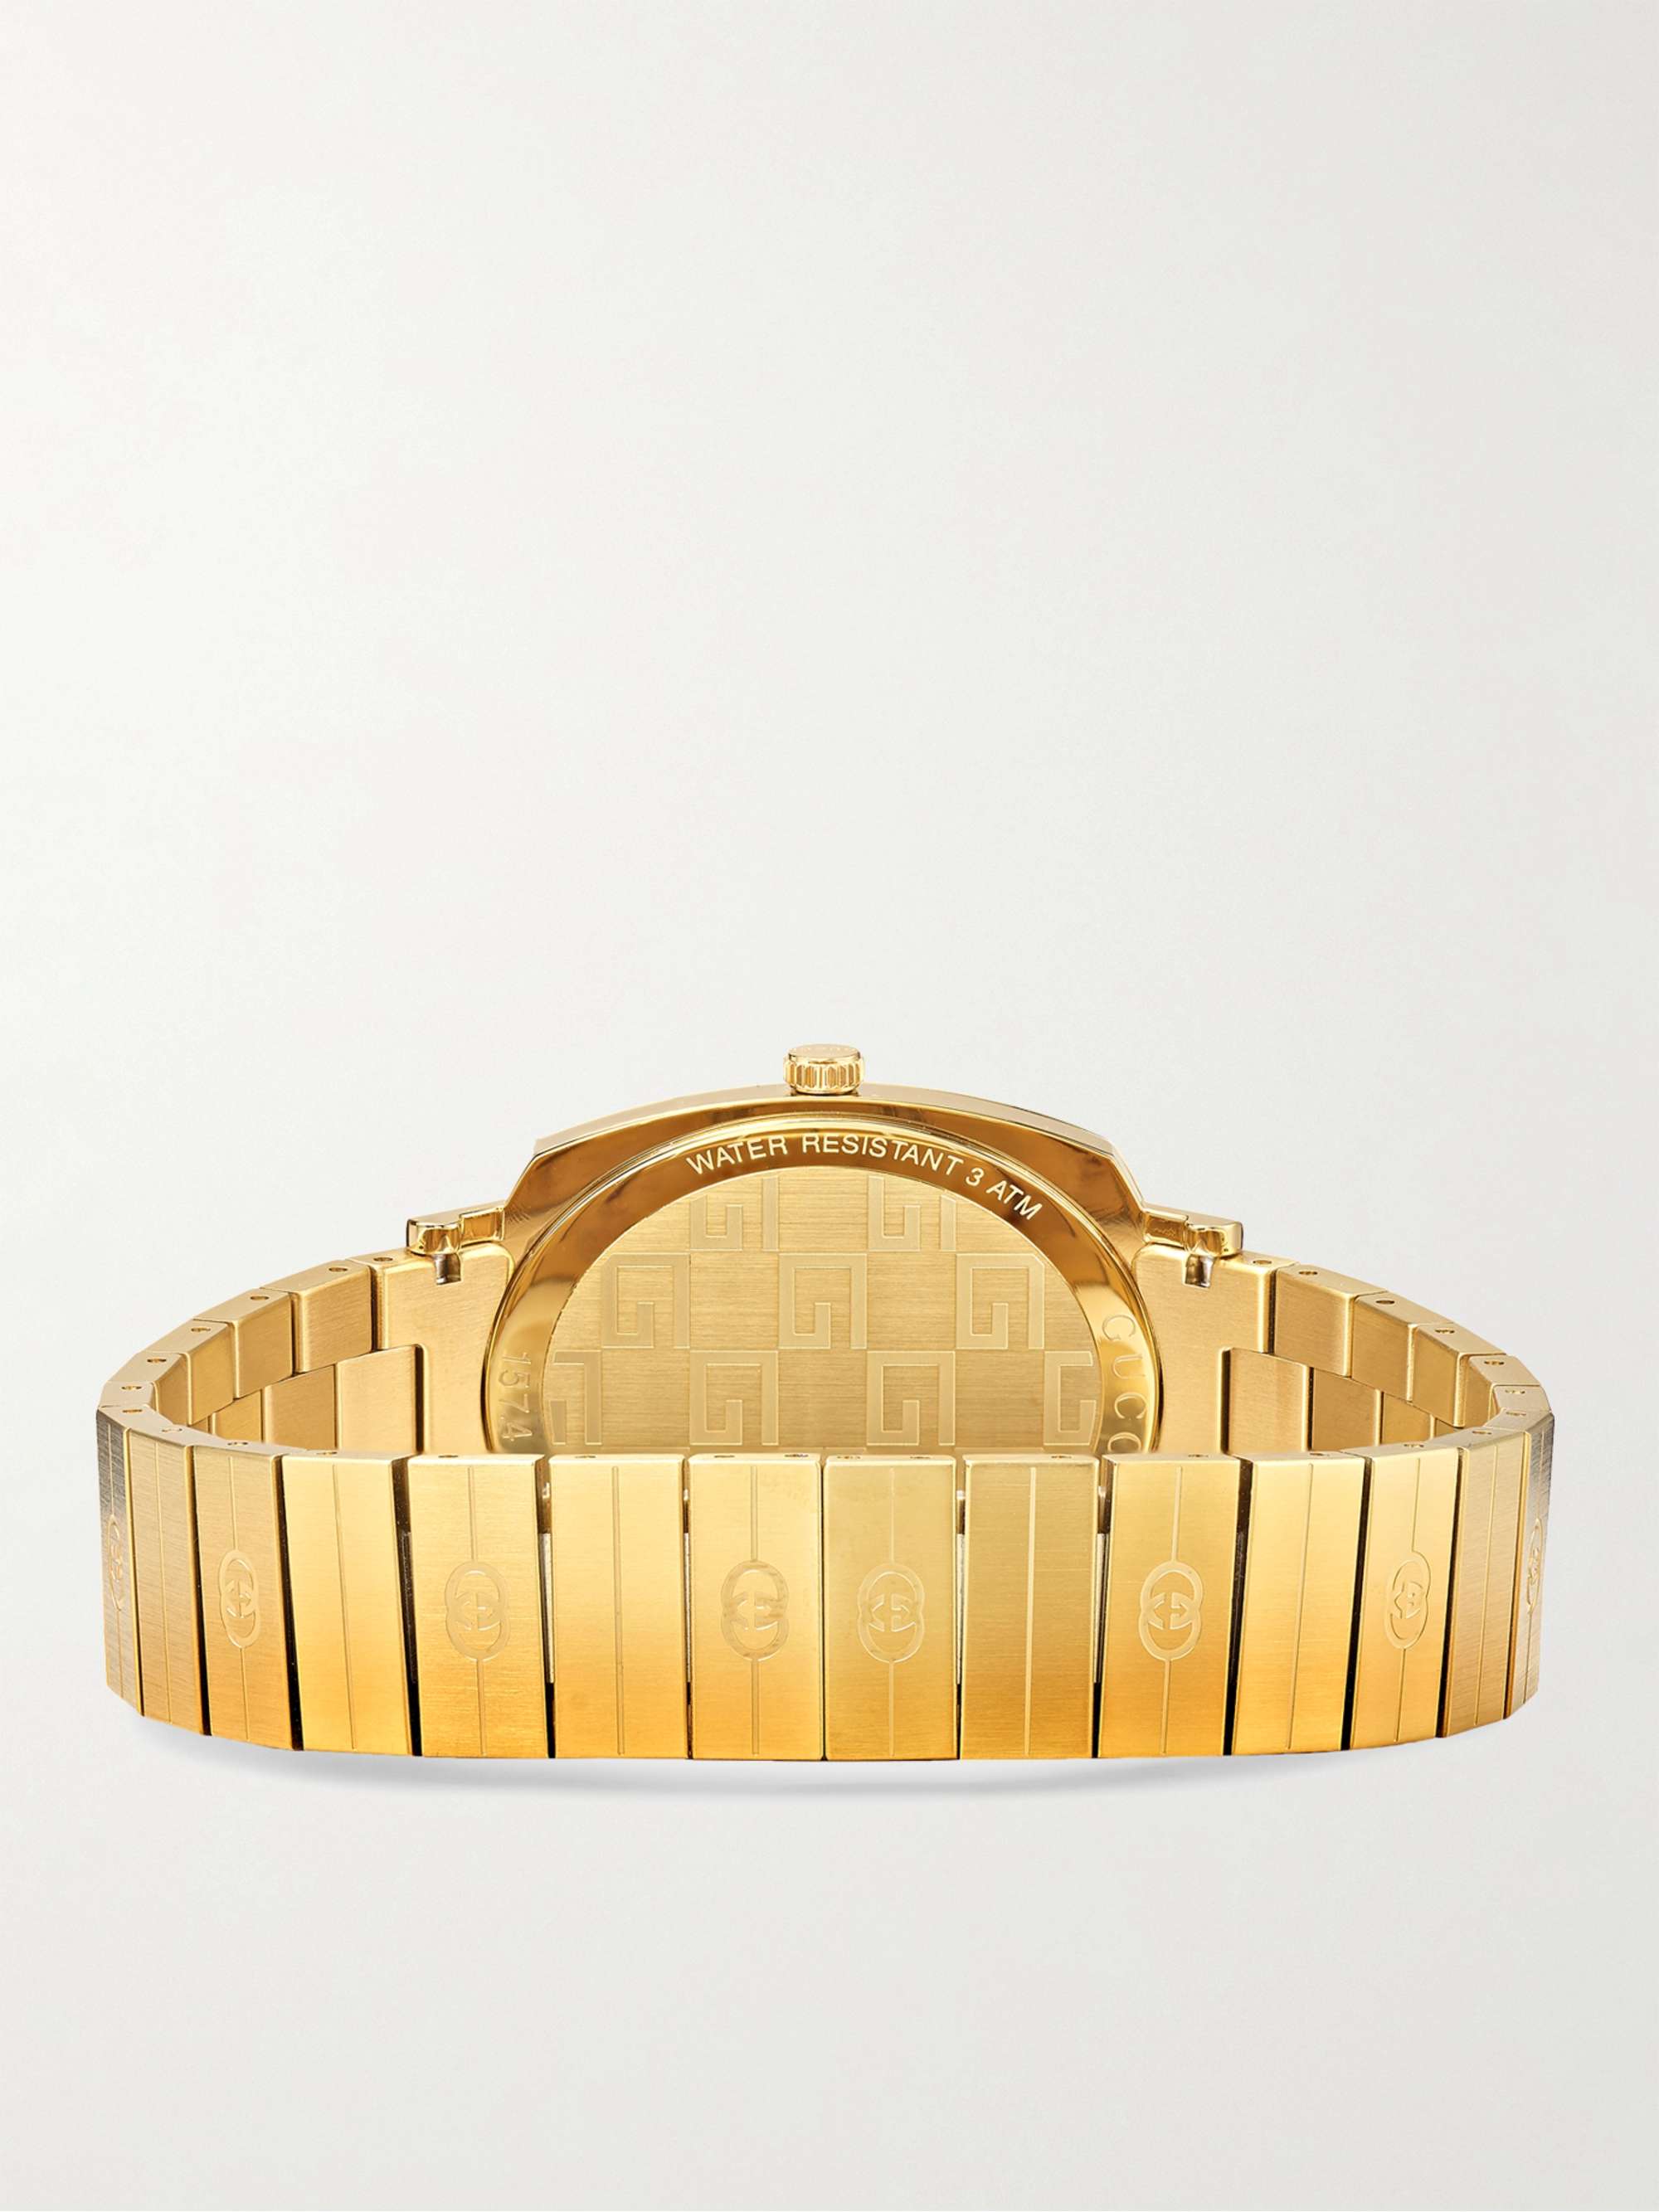 GUCCI Grip 38mm Gold-Tone PVD-Coated Watch